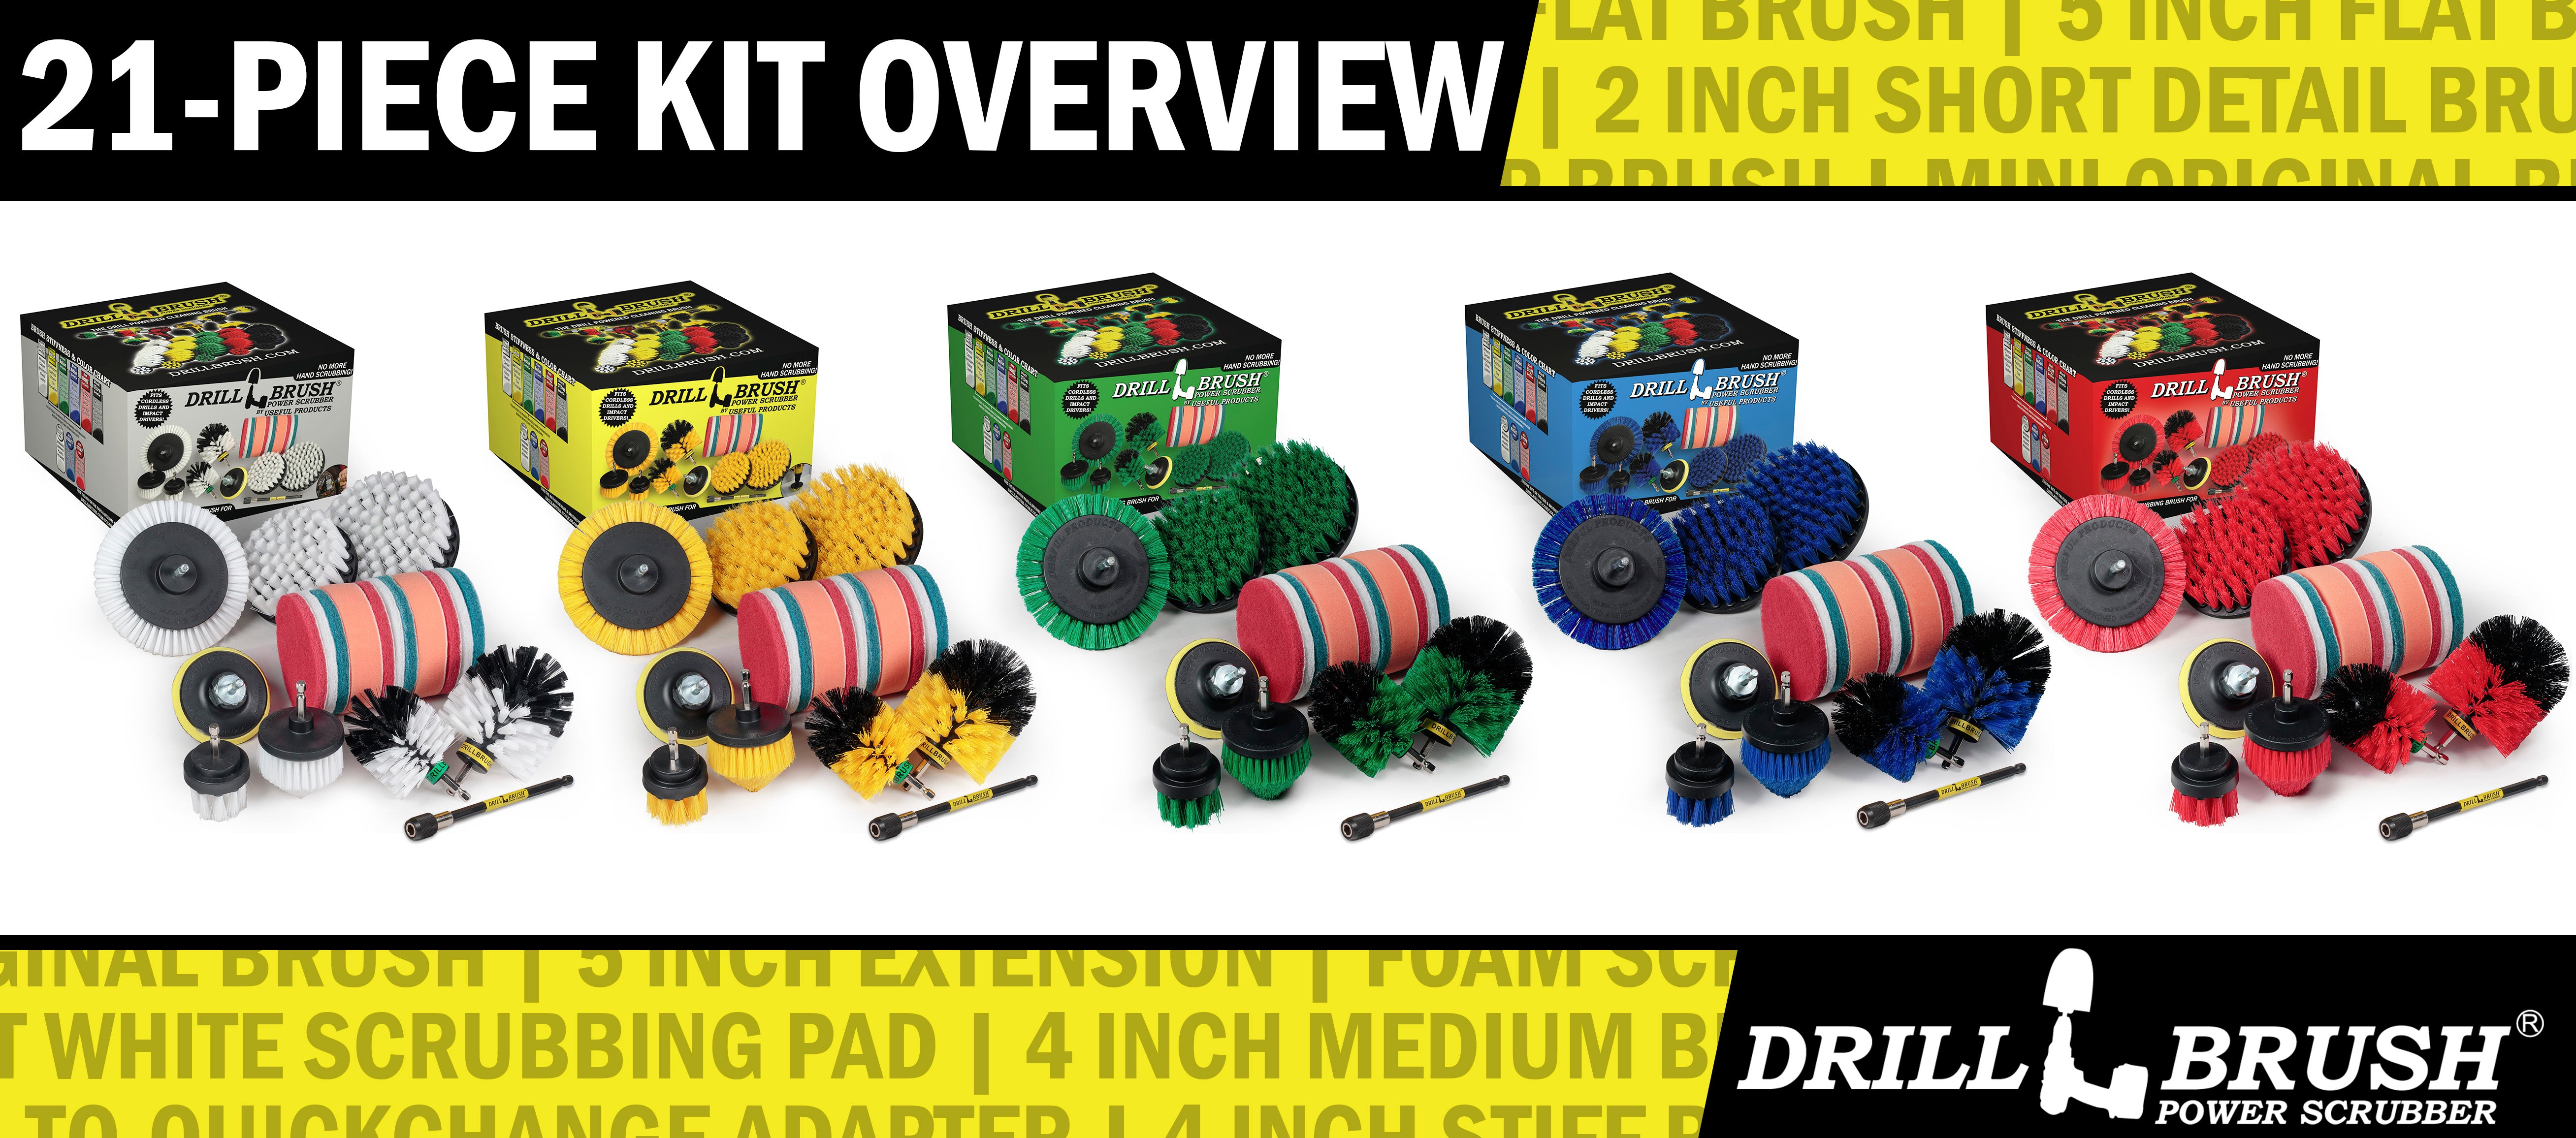 New 21-piece Drillbrush Pad and Brush Kits are Now Available!